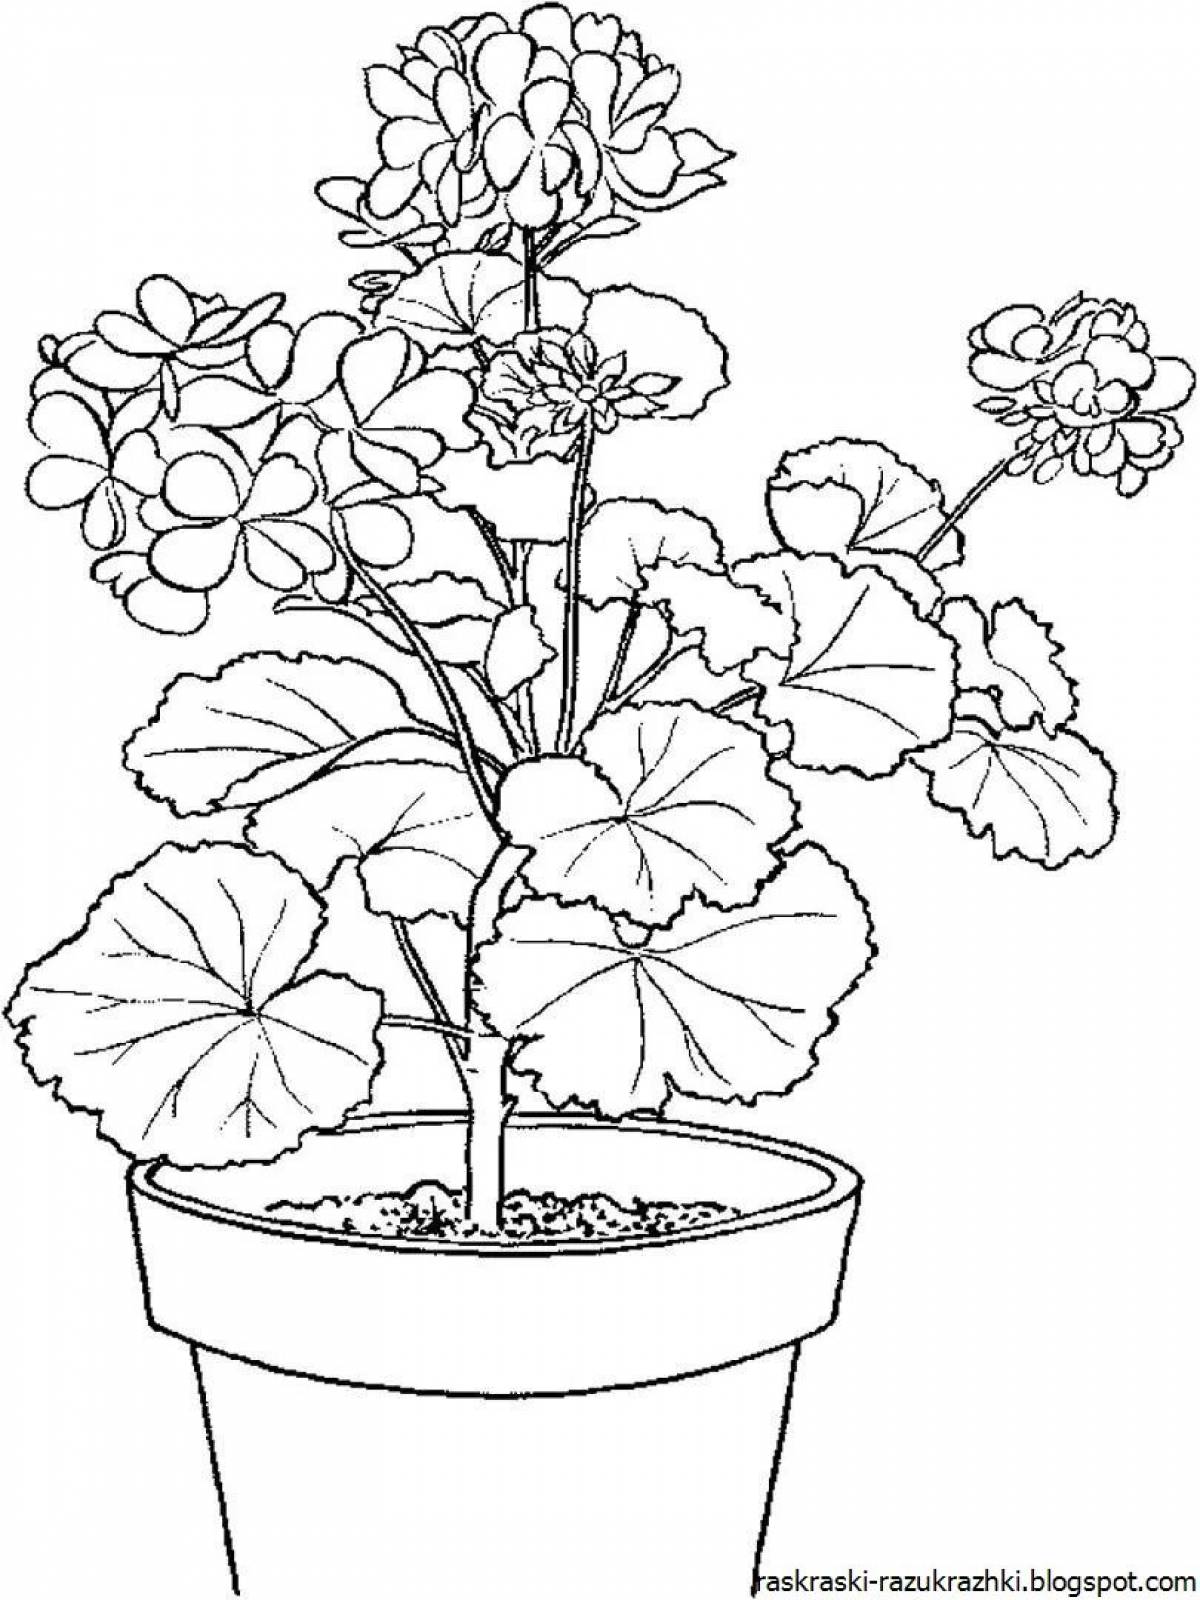 Adorable potted geranium for teenagers